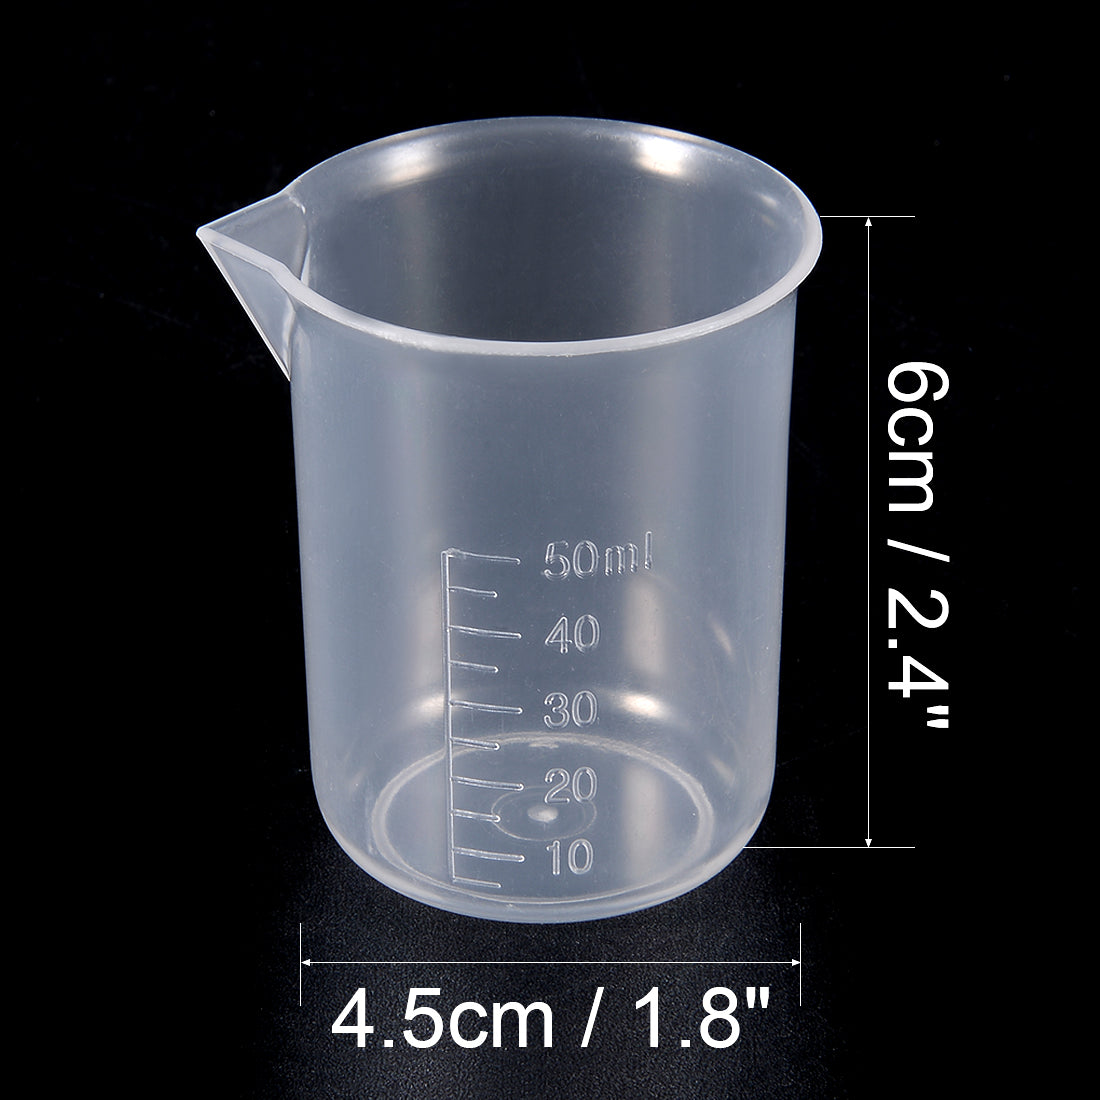 uxcell Uxcell 8pcs Measuring Cup Labs PP Graduated Beakers 50ml